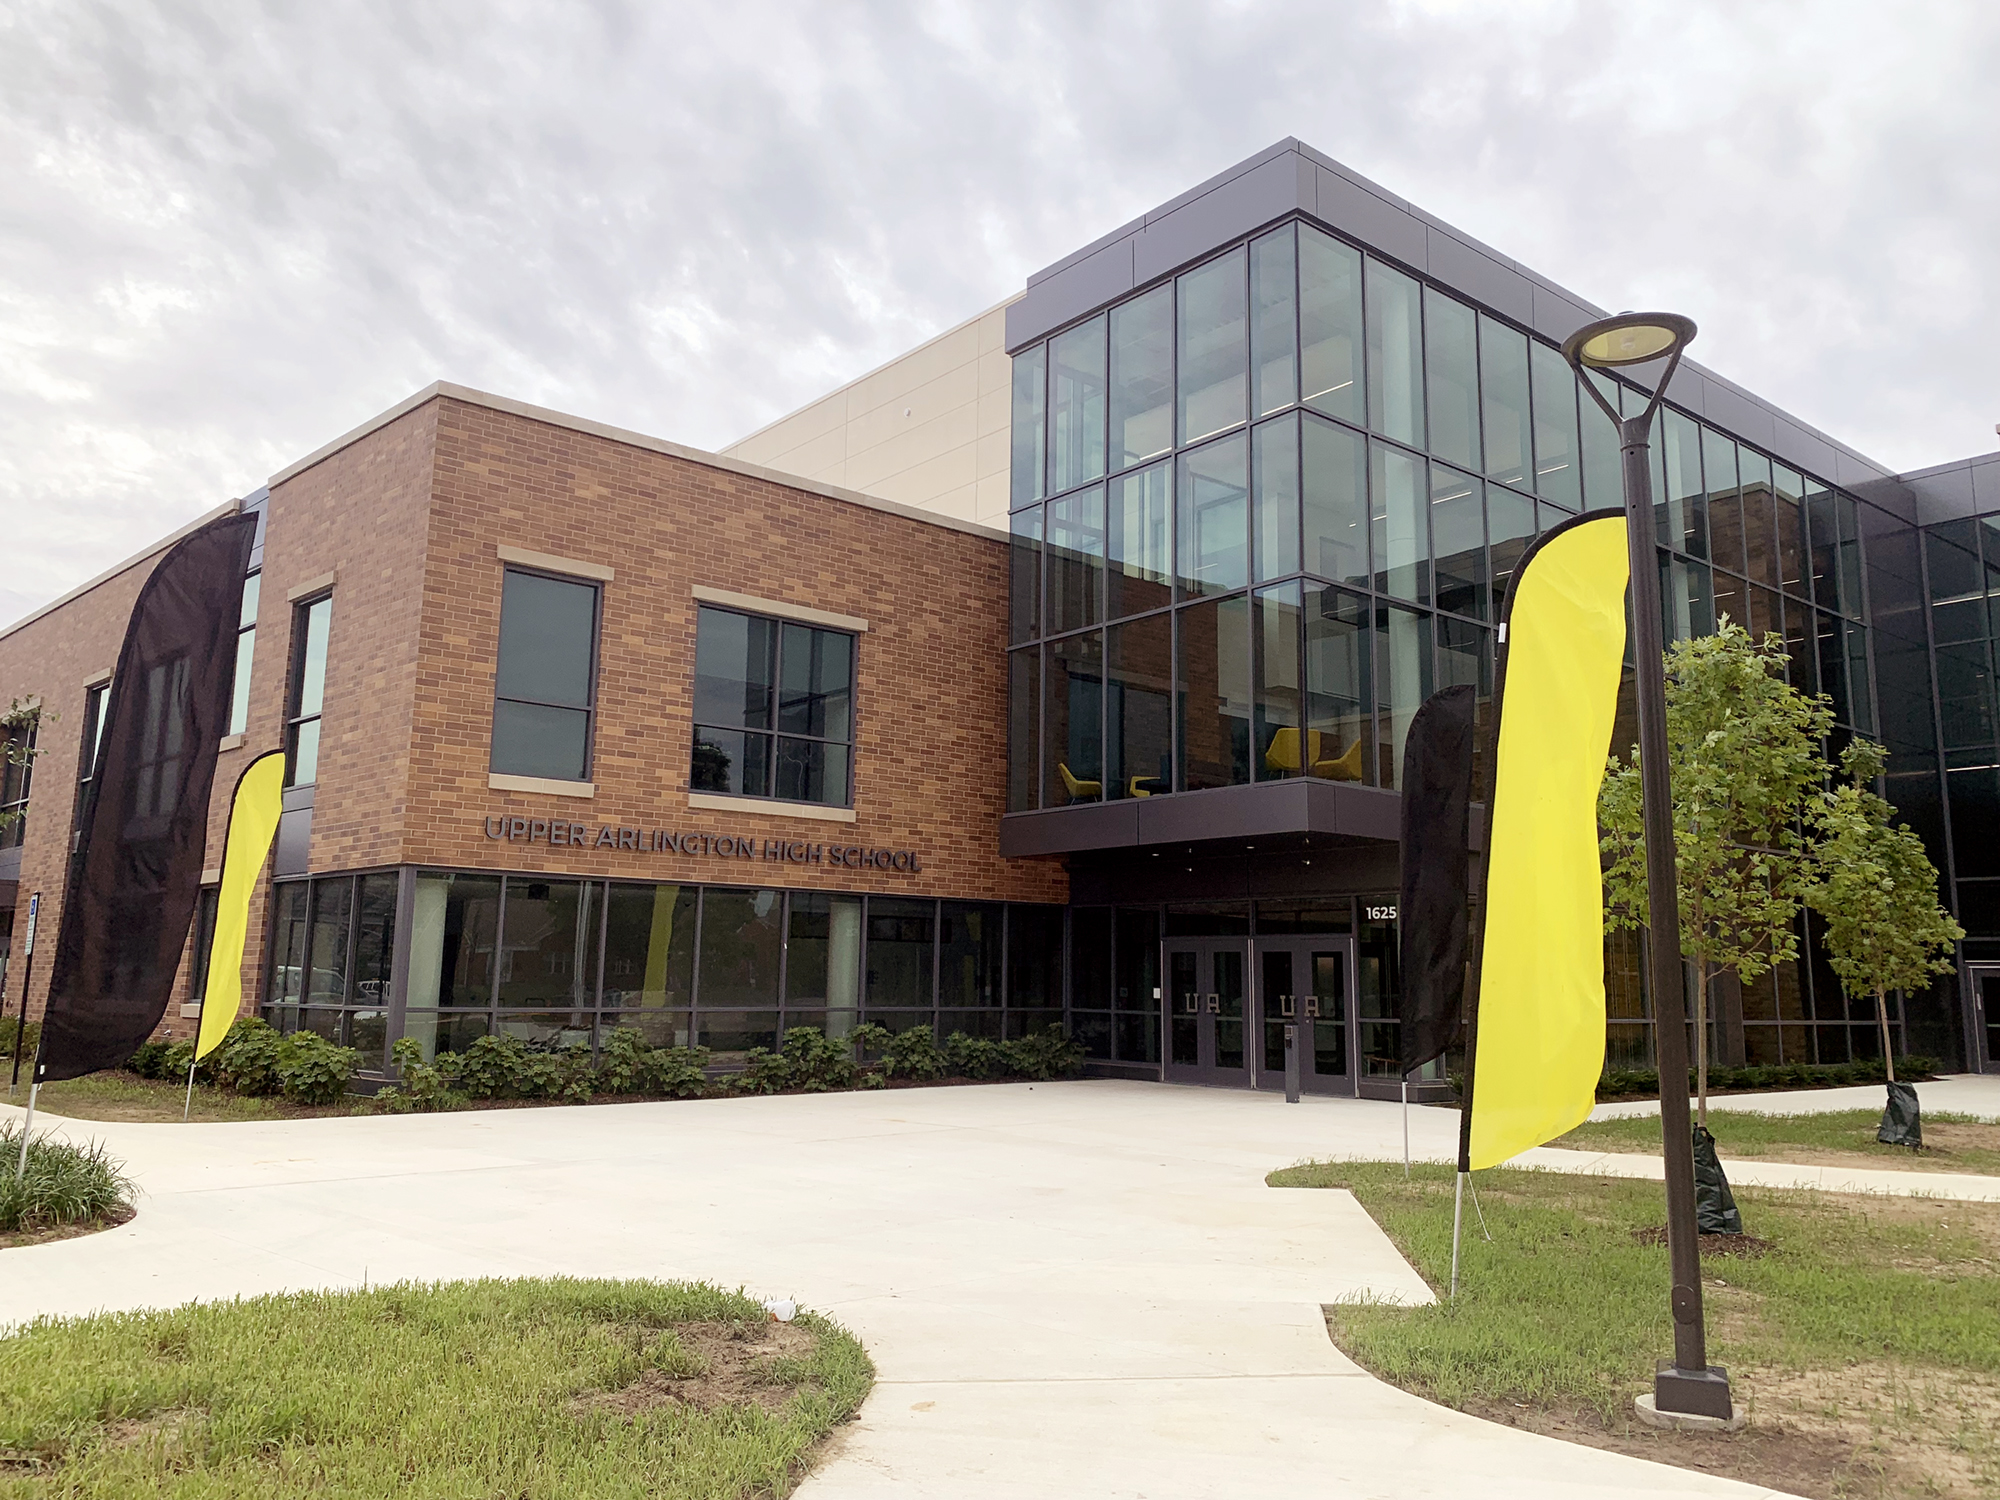 An exterior photo of the front entrance to Upper Arlington High School